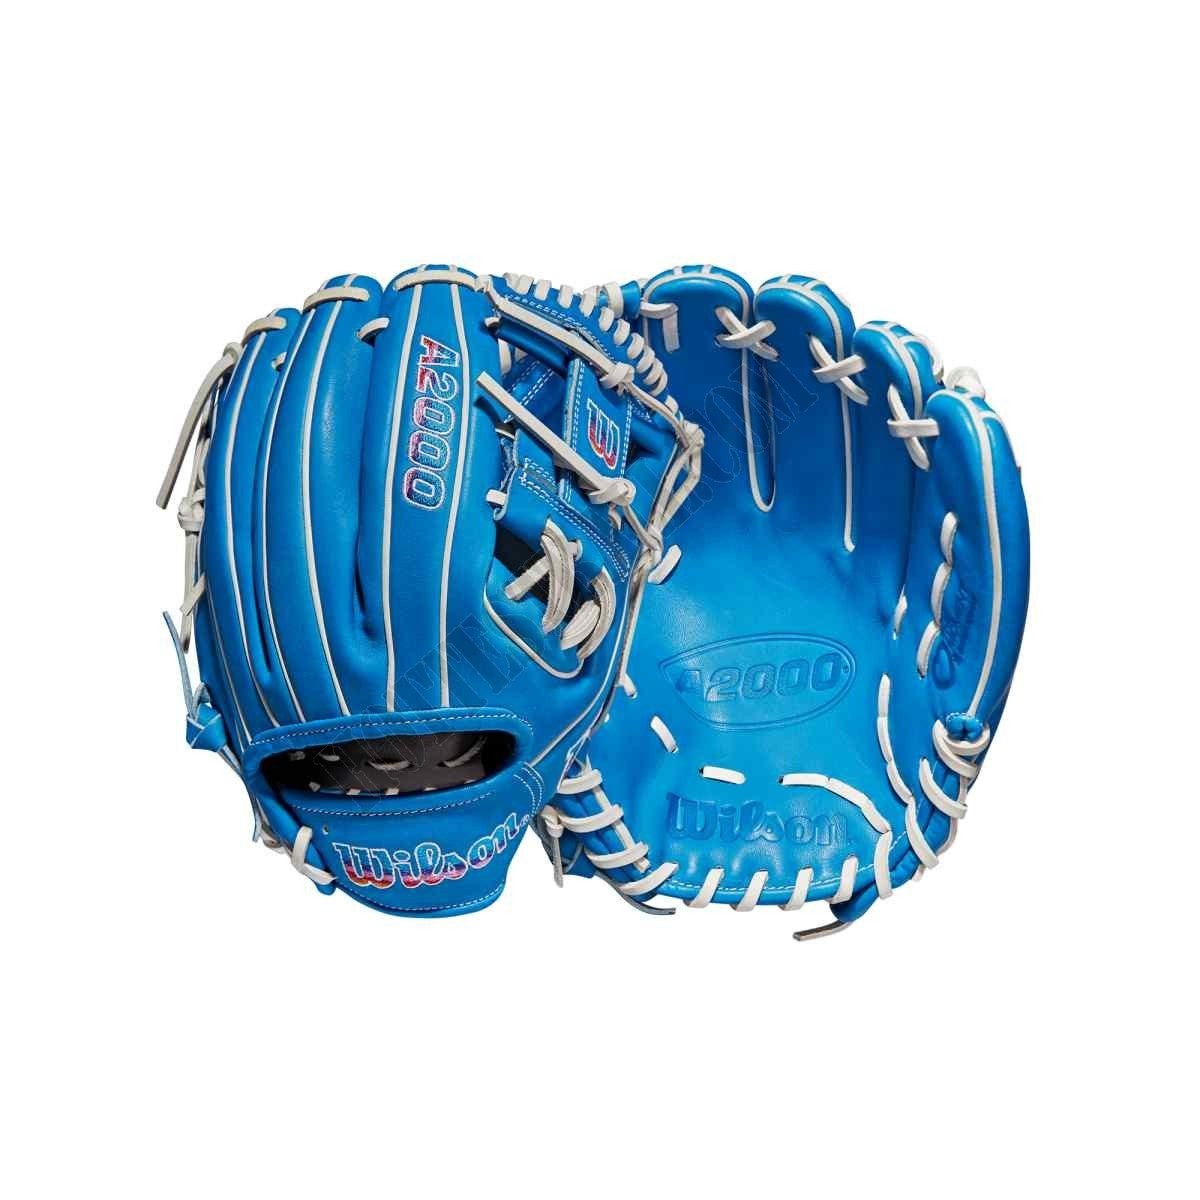 2022 Autism Speaks A2000 1786 11.5" Infield Baseball Glove - Limited Edition ● Wilson Promotions - 2022 Autism Speaks A2000 1786 11.5" Infield Baseball Glove - Limited Edition ● Wilson Promotions